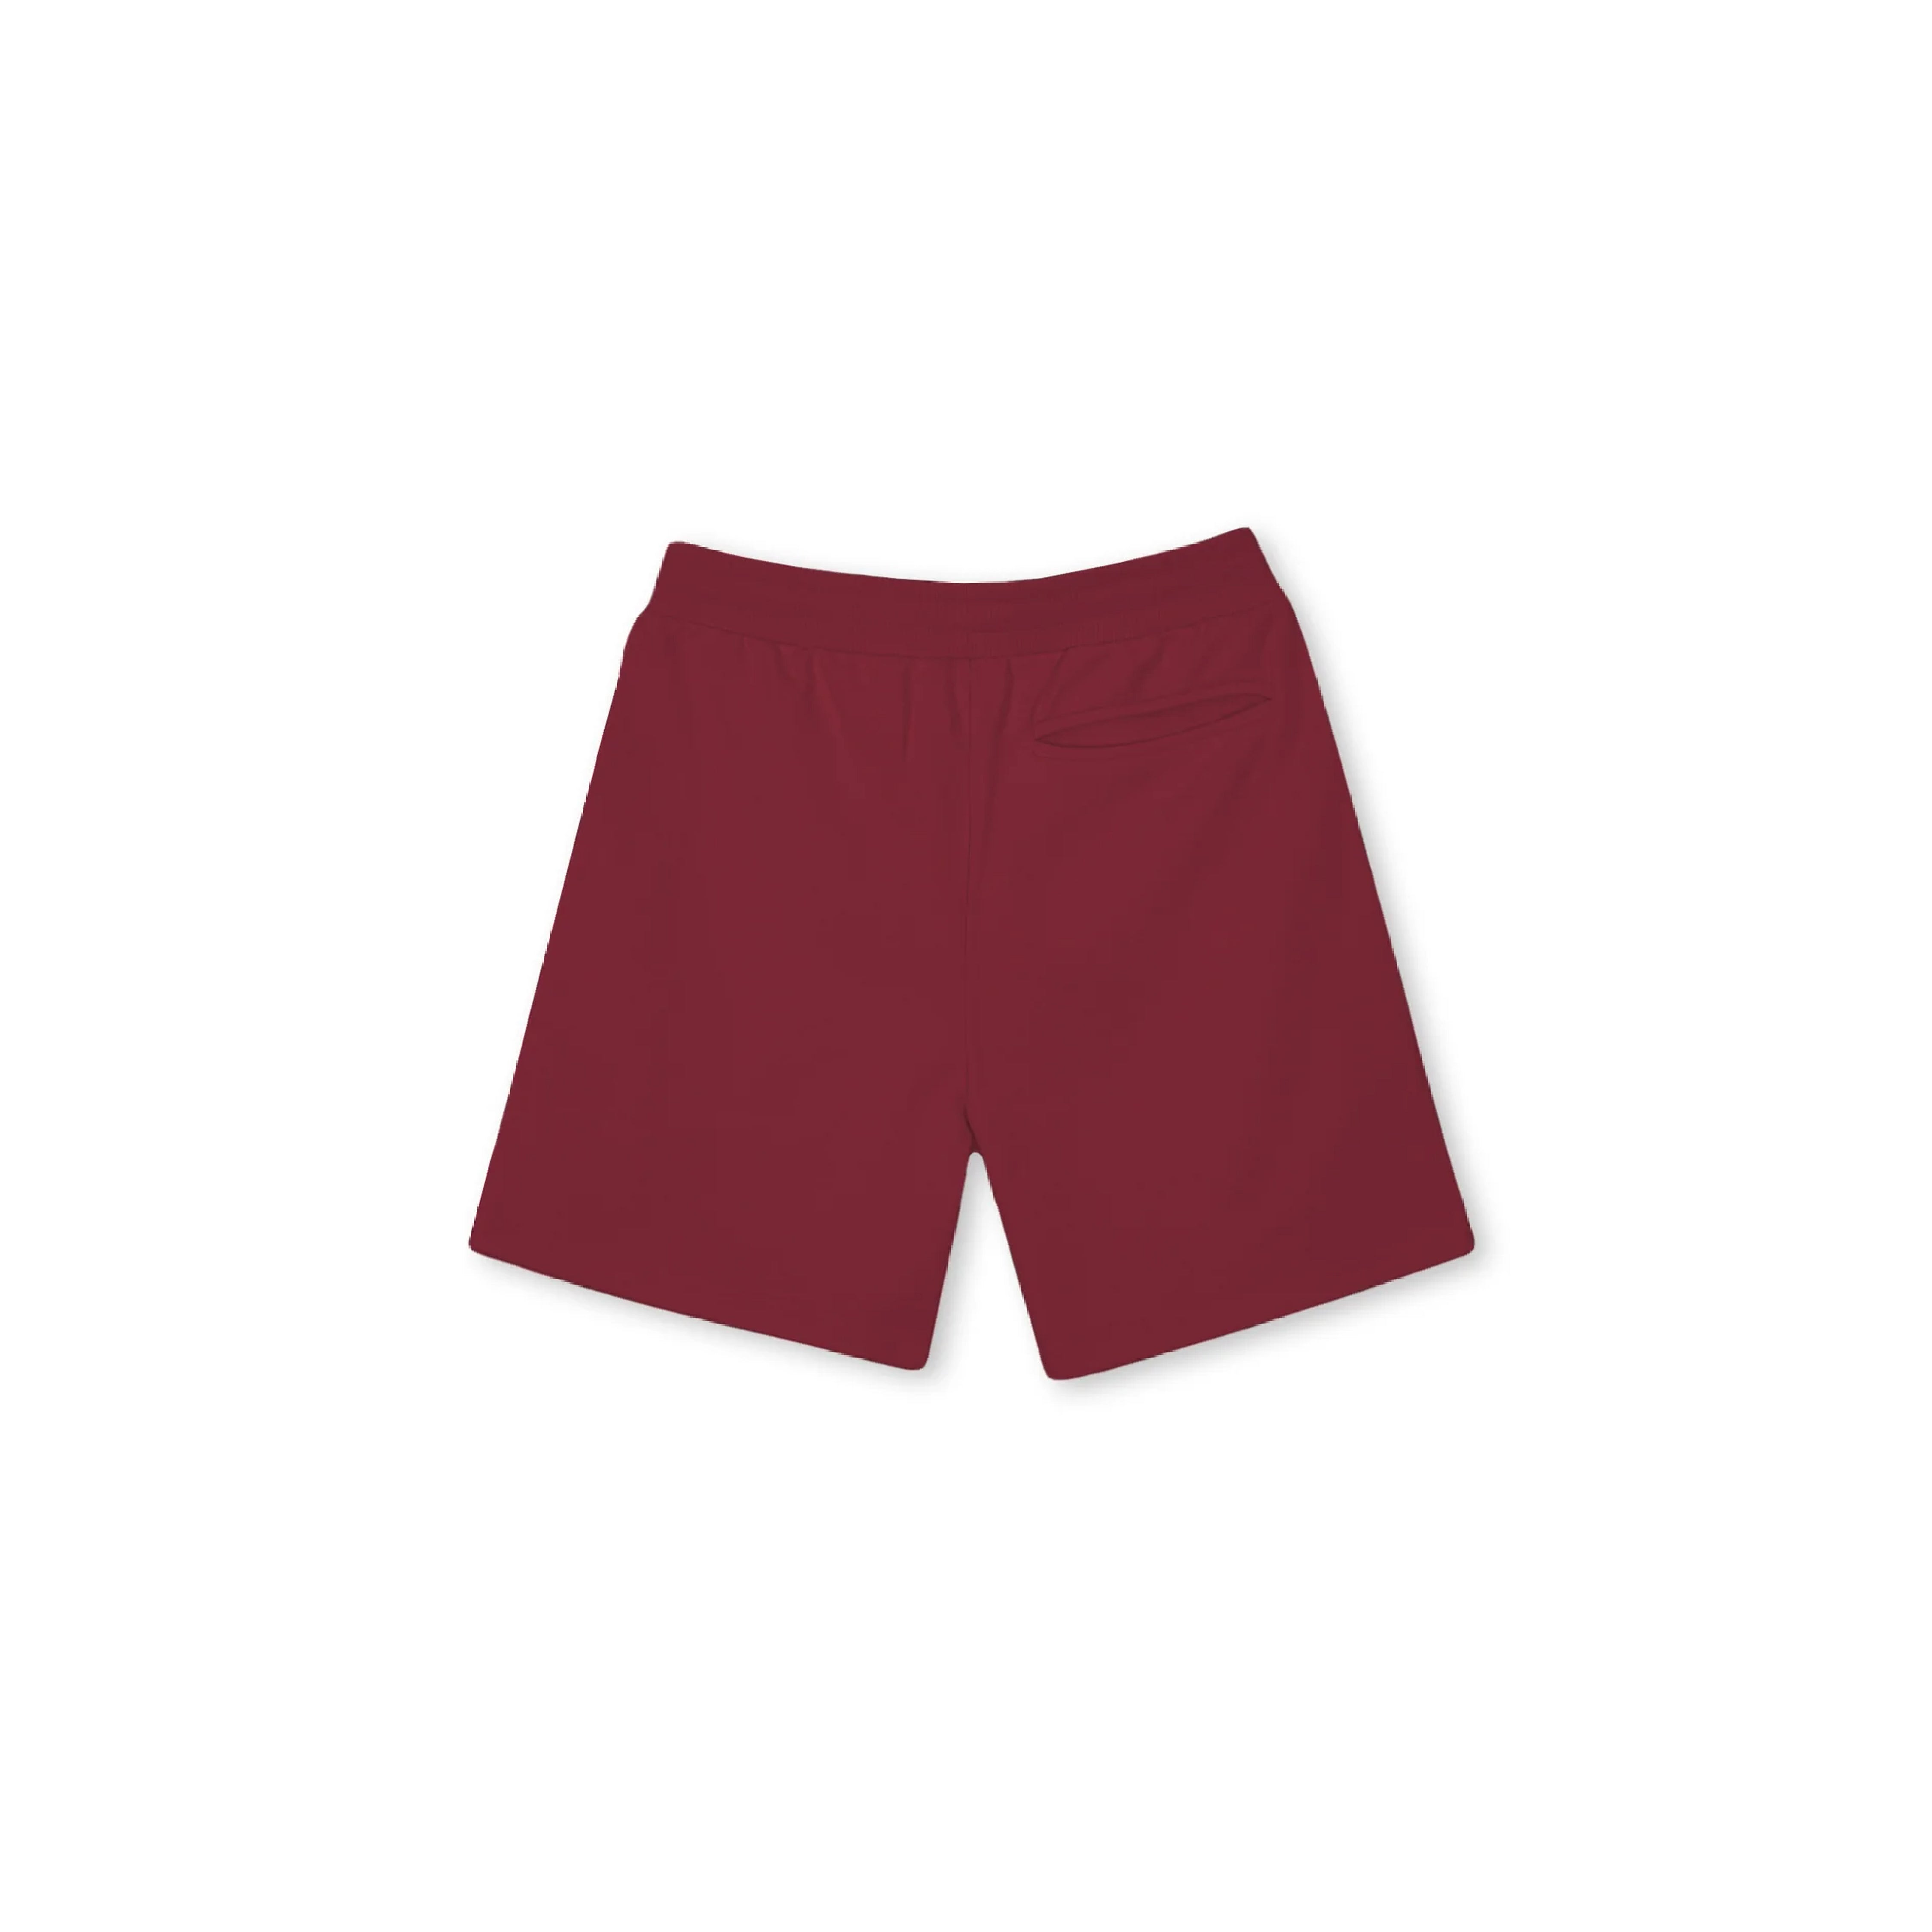 Dreamers French Terry Shorts - Ox Blood